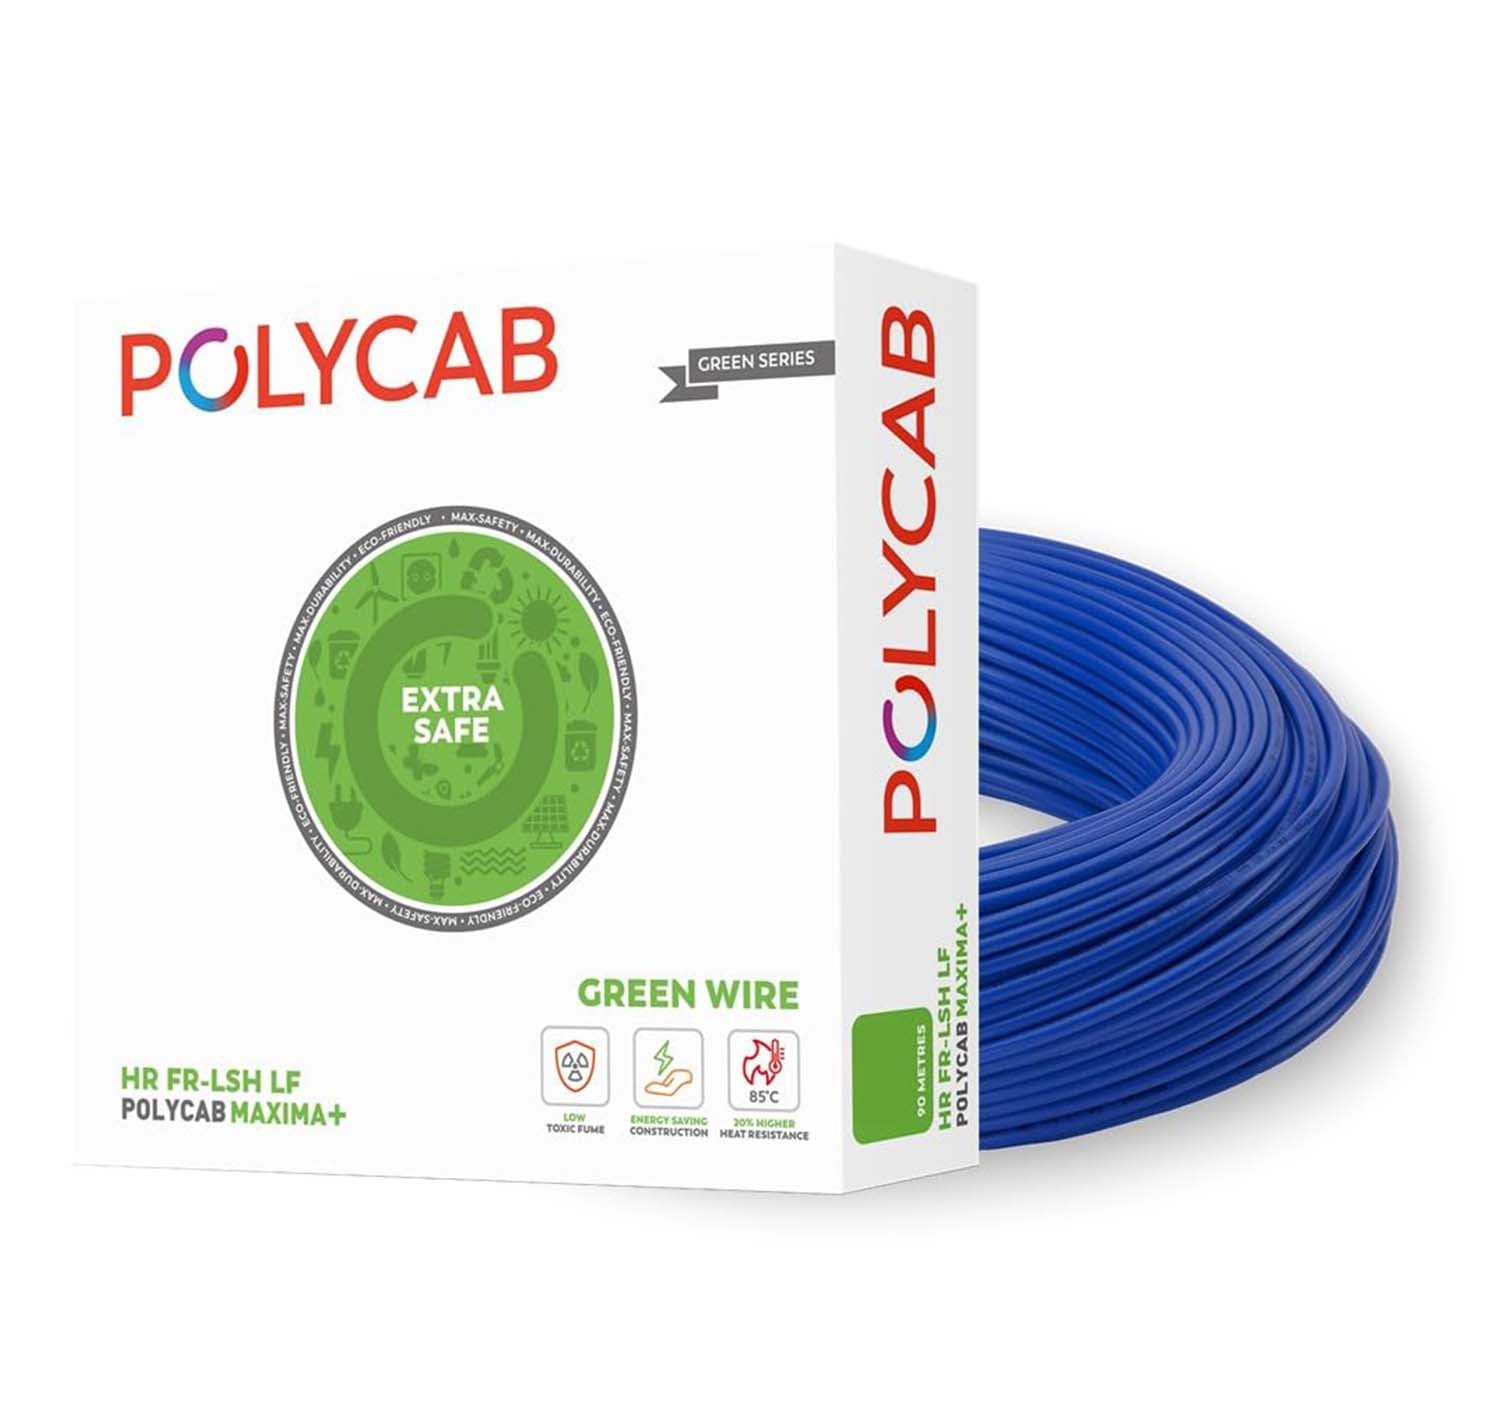 Polycab Maxima+ Domestic Electrical Wire - 90 Meter - Blue Wire